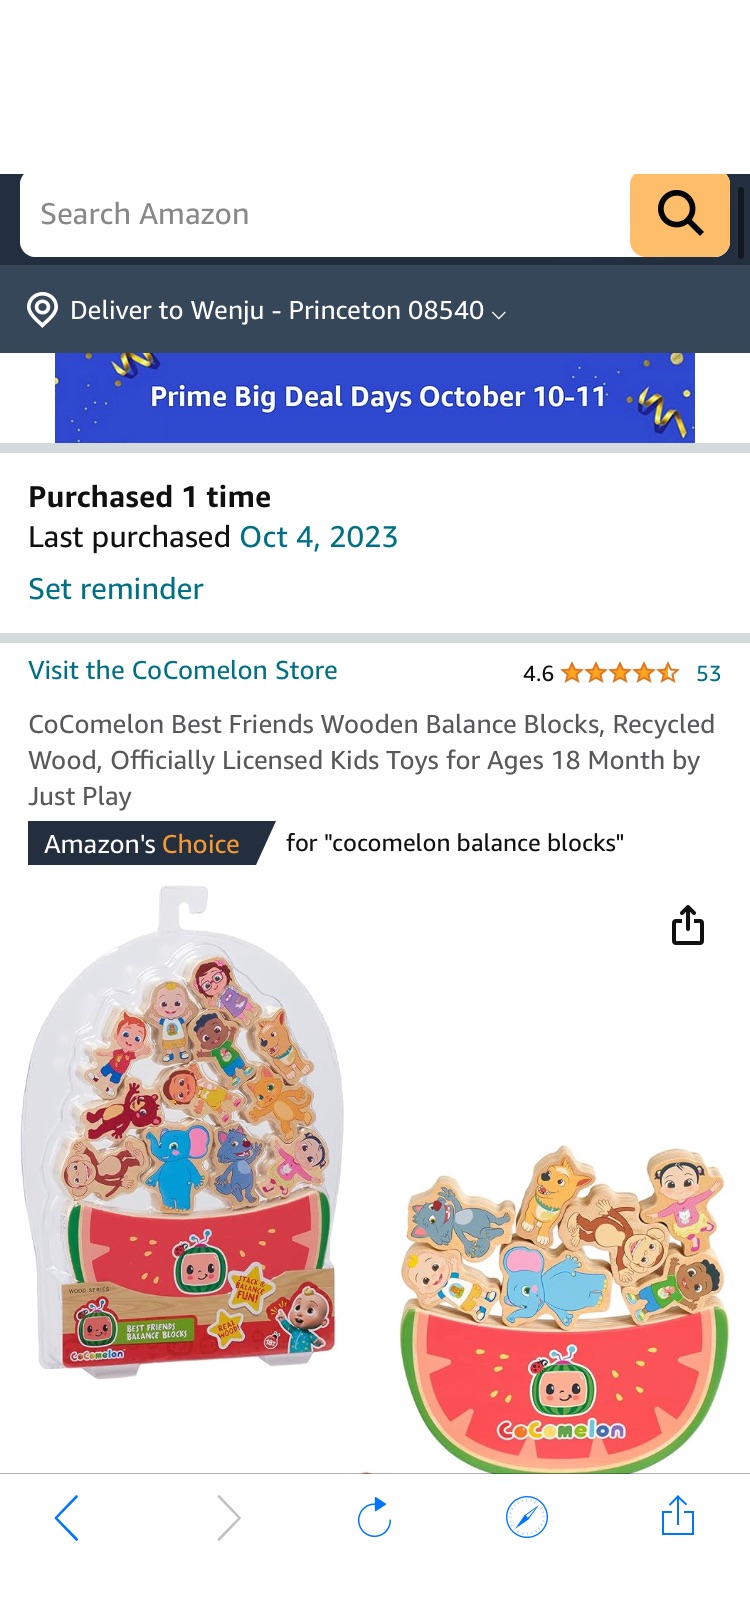 Amazon.com: CoComelon Best Friends Wooden Balance Blocks, Recycled Wood, Officially Licensed Kids Toys for Ages 18 Month by Just Play : Toys & Games